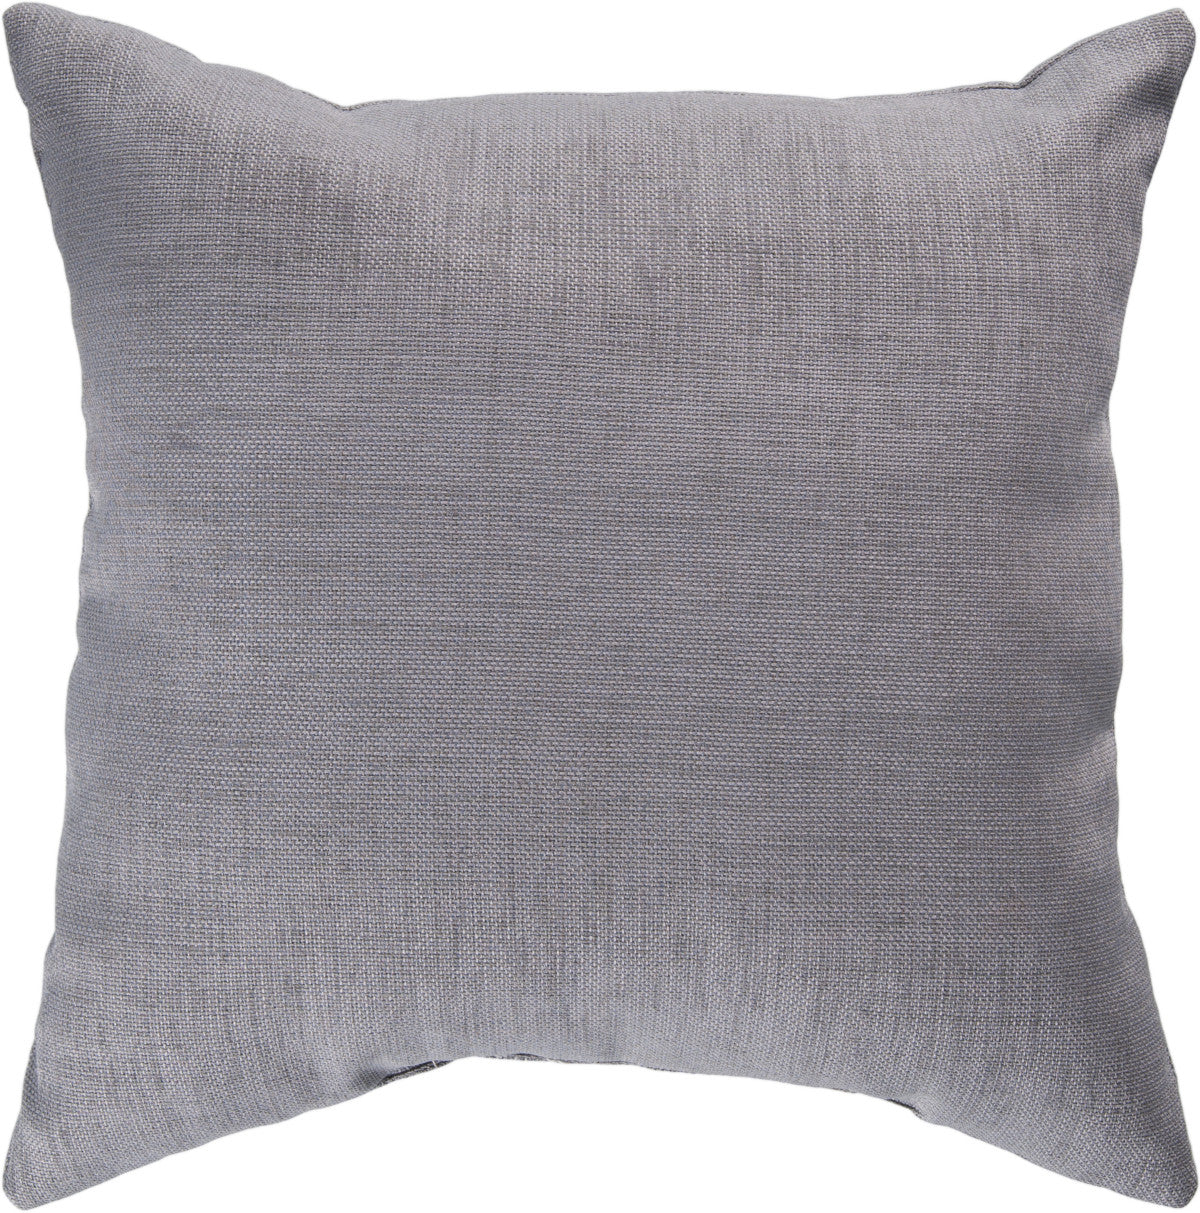 Surya Storm Stunning Solid Cover ZZ-406 Pillow